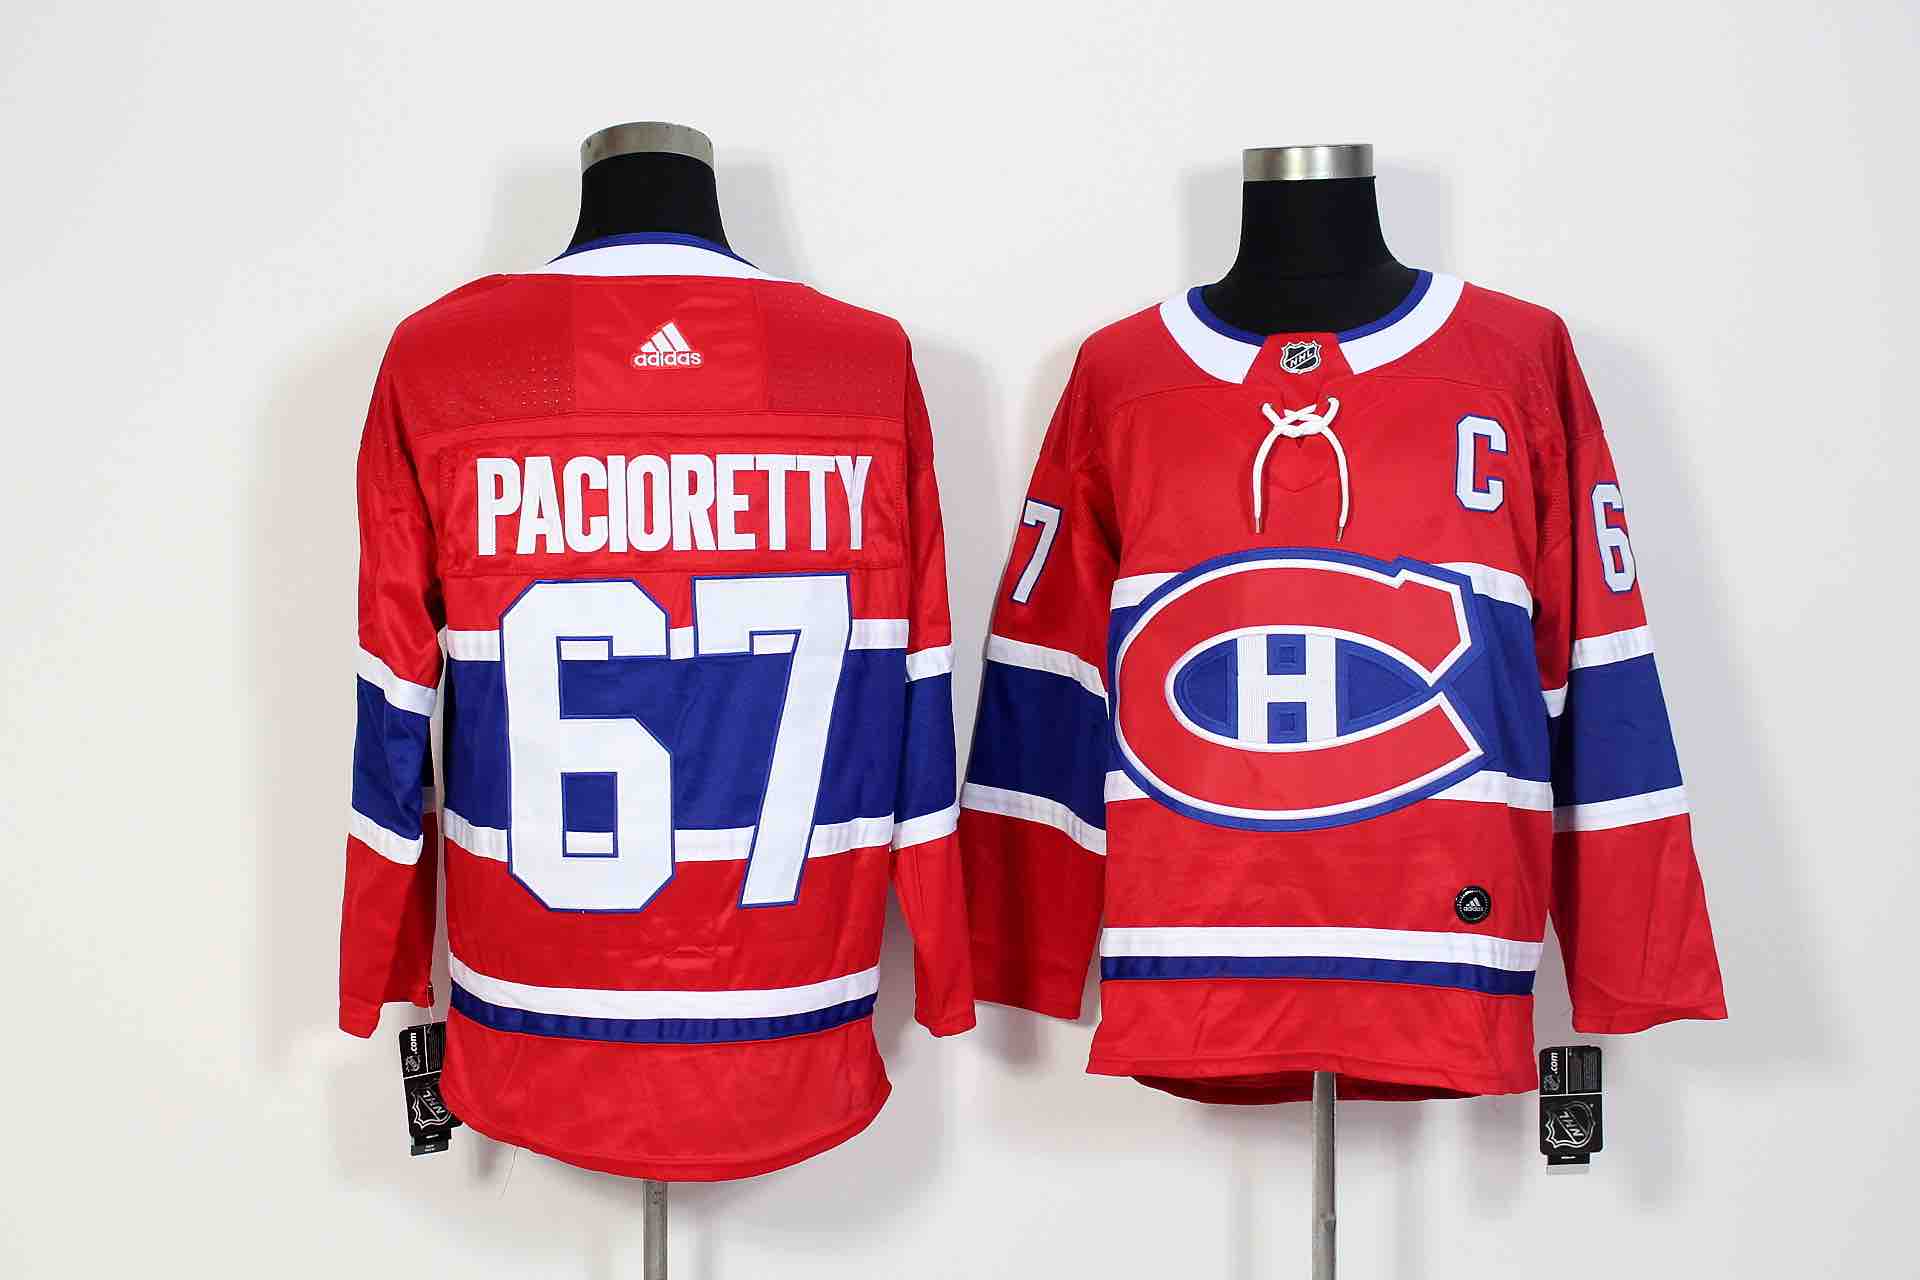 Adidas NHL Montreal Canadiens #67 Pacioretty Red Jersey